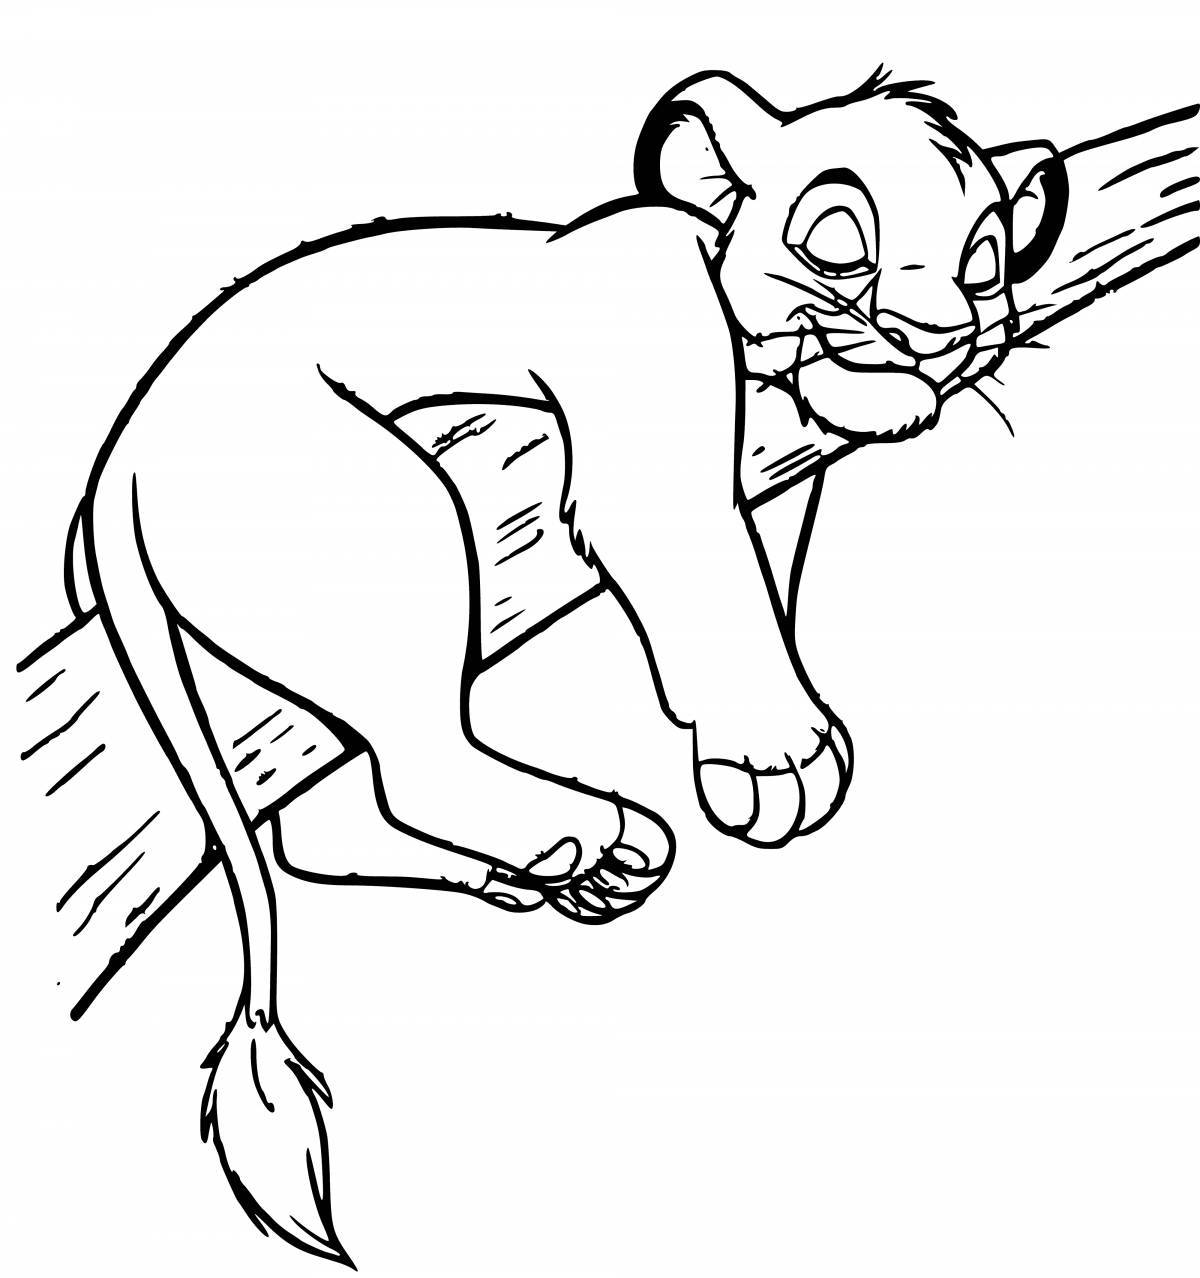 Brightly colored lion king coloring page